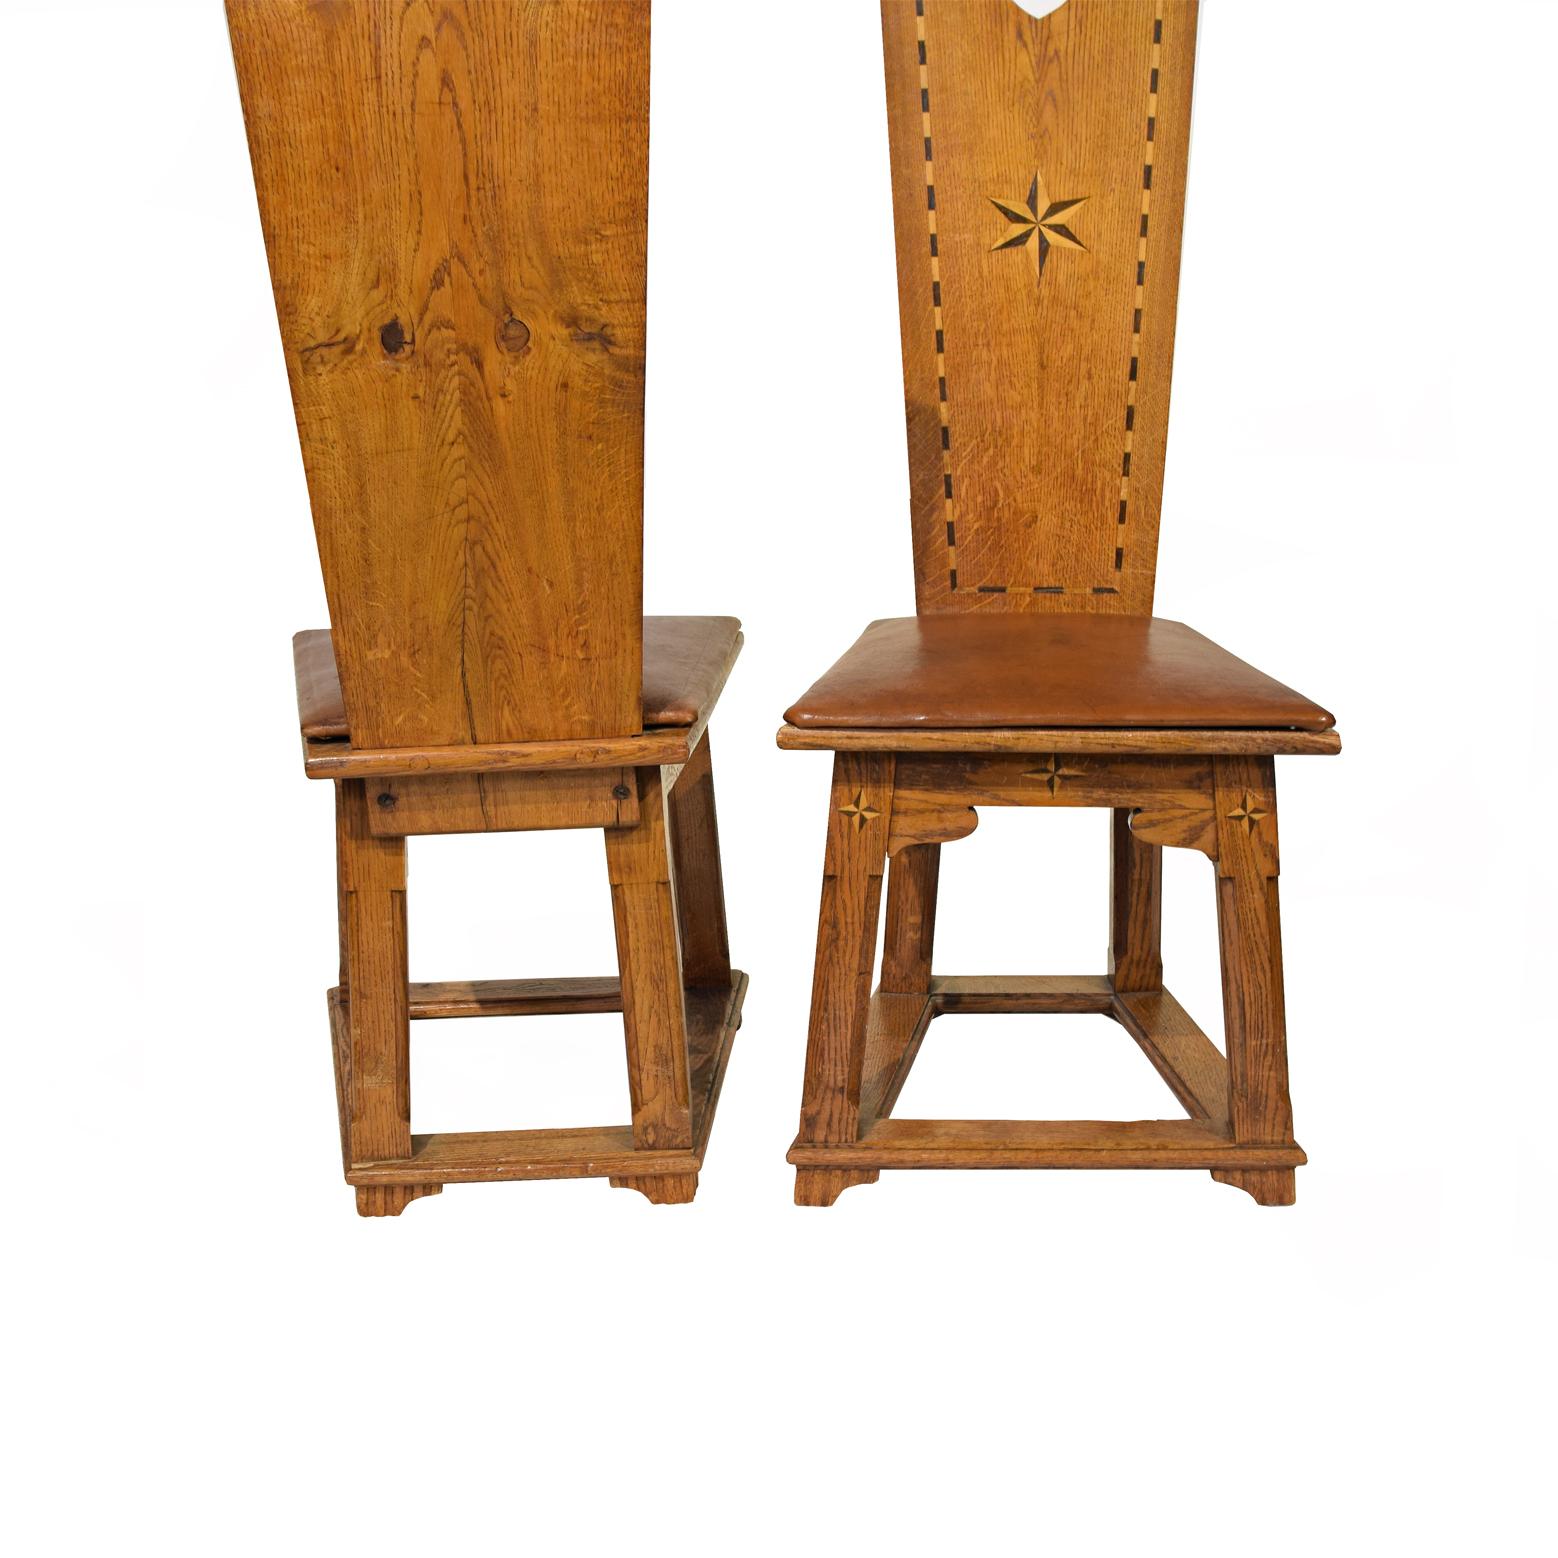 20th Century Rare 10 Arts & Craft Chairs from Villa Foresta Lidingö Sweden 1908-1910 For Sale